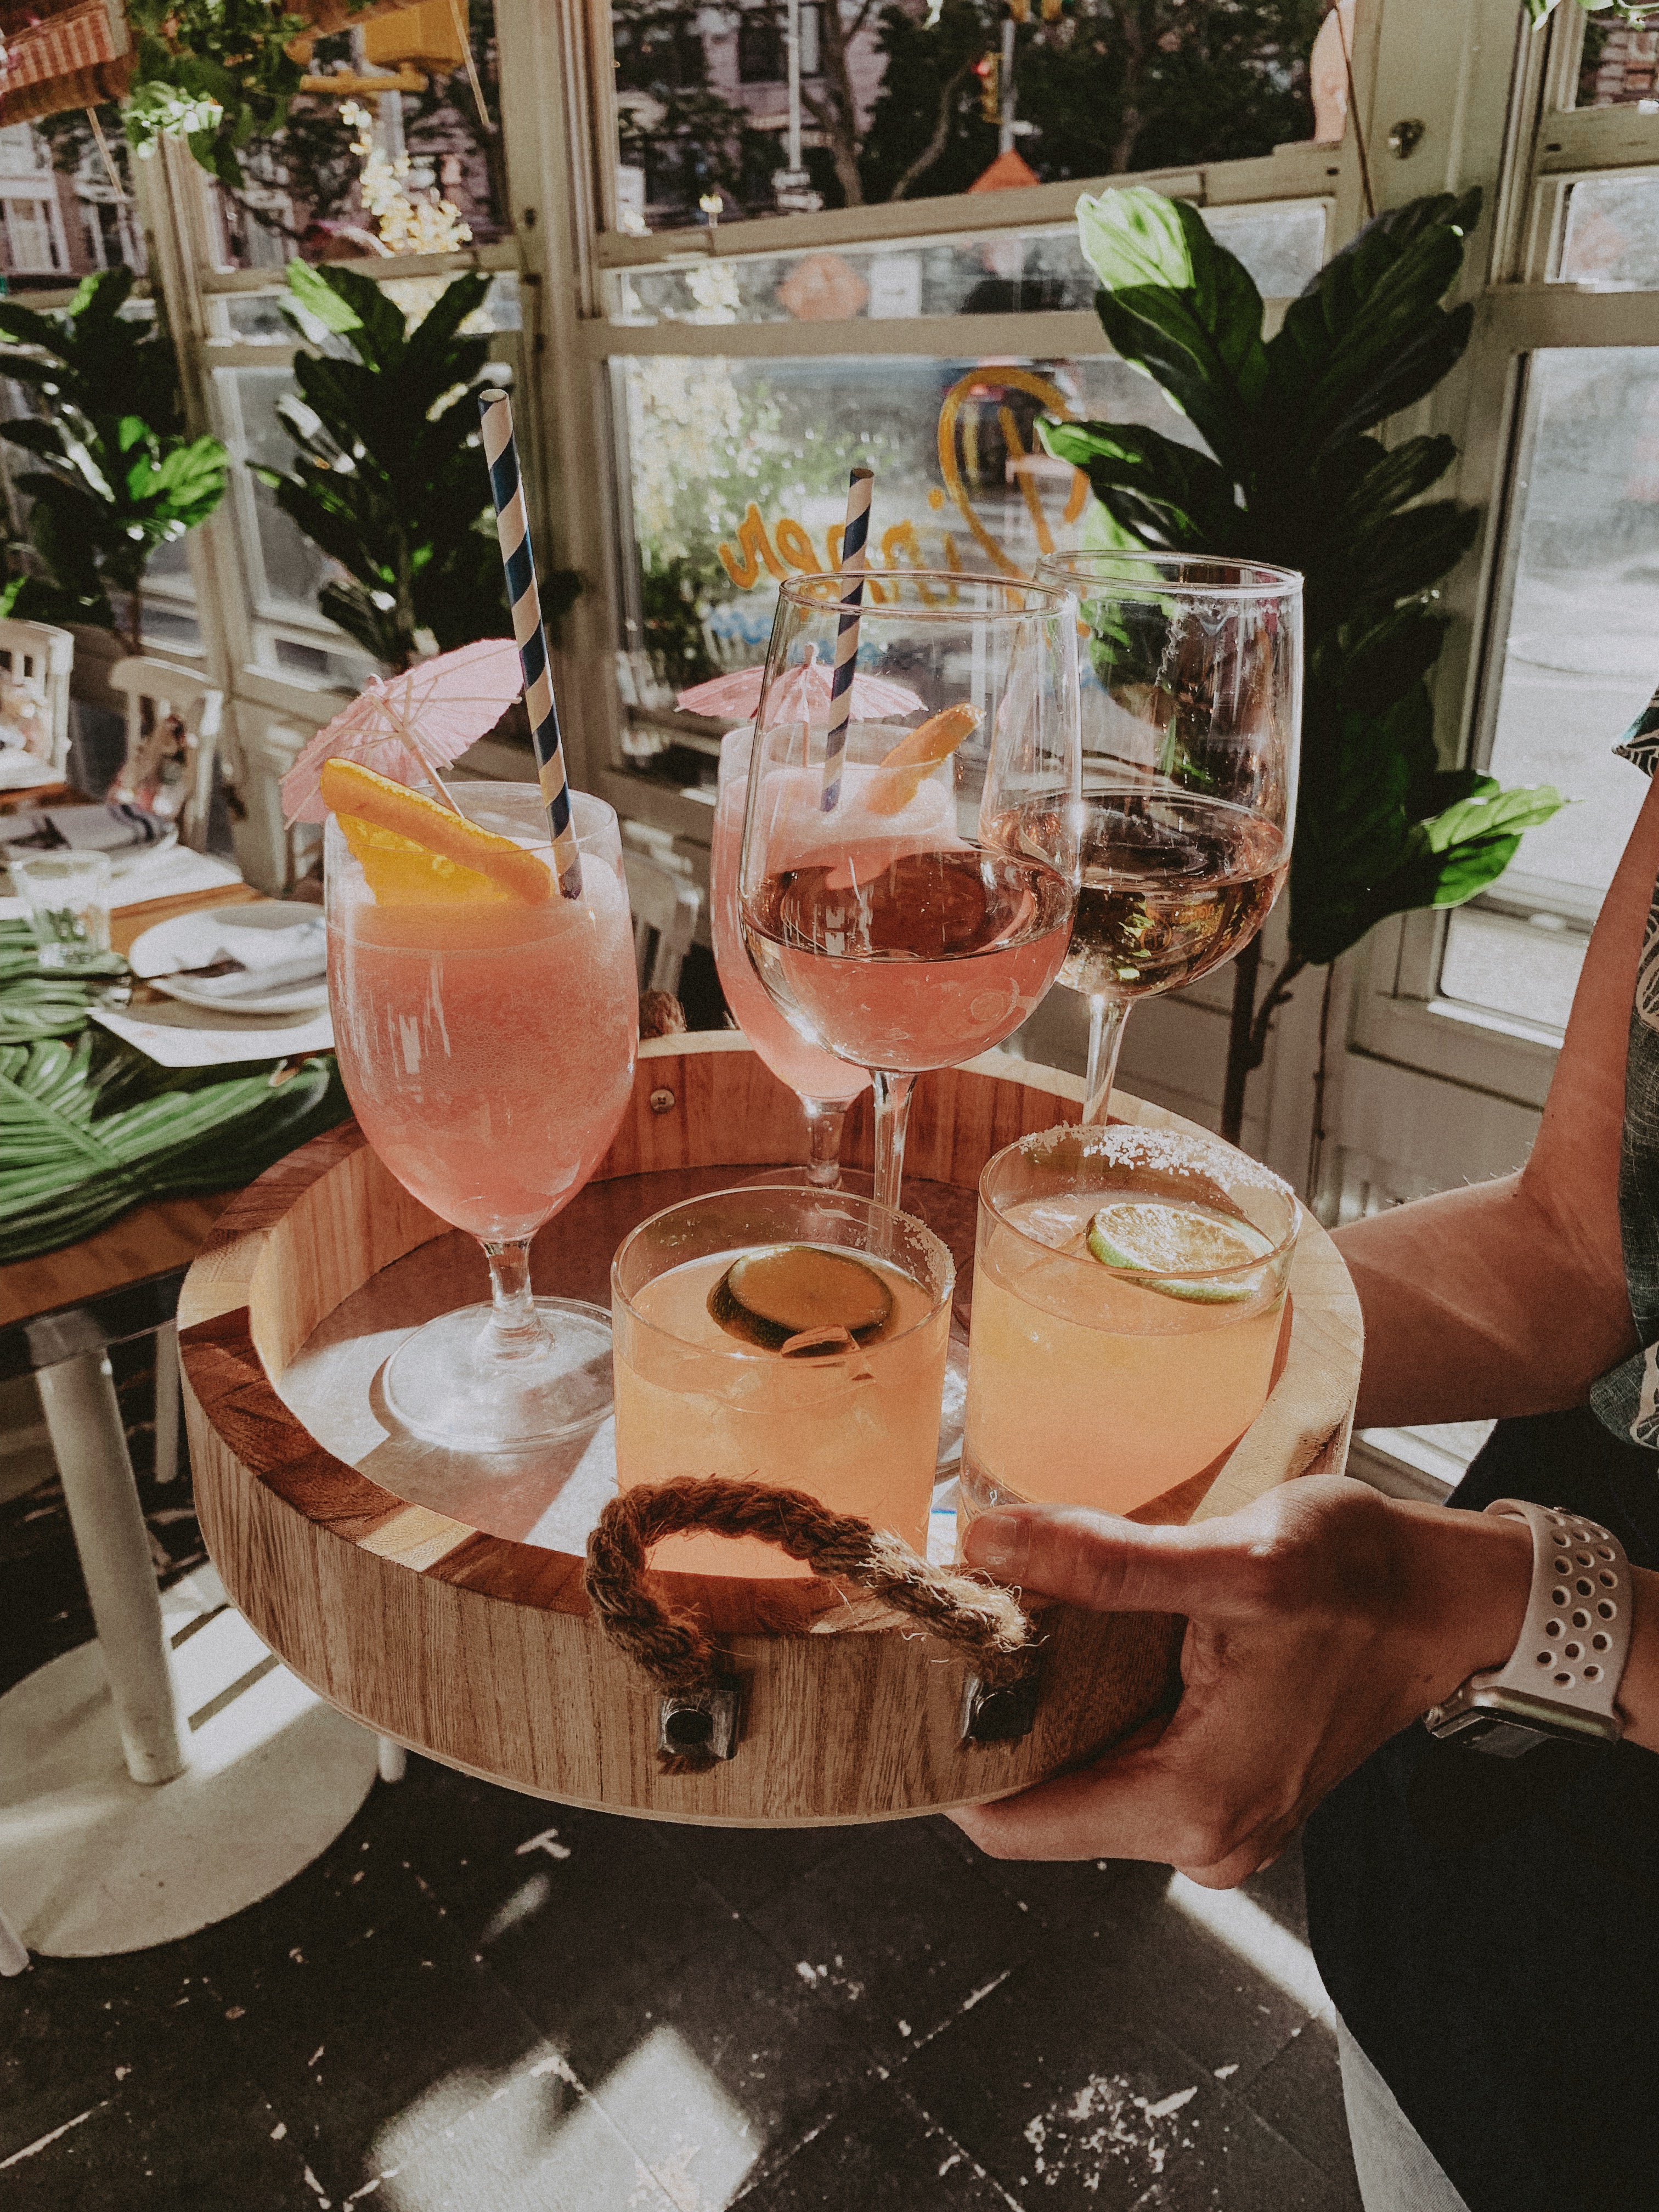 Where To Get The Best Frozen Rosé In NYC – A Summer Day cafe - Drinks - Frozé – Bar - Resturant - New York City #nyc #newyorkcity #frosé #rosé #cheers #summer #travel #vacation #drinks #cocktails